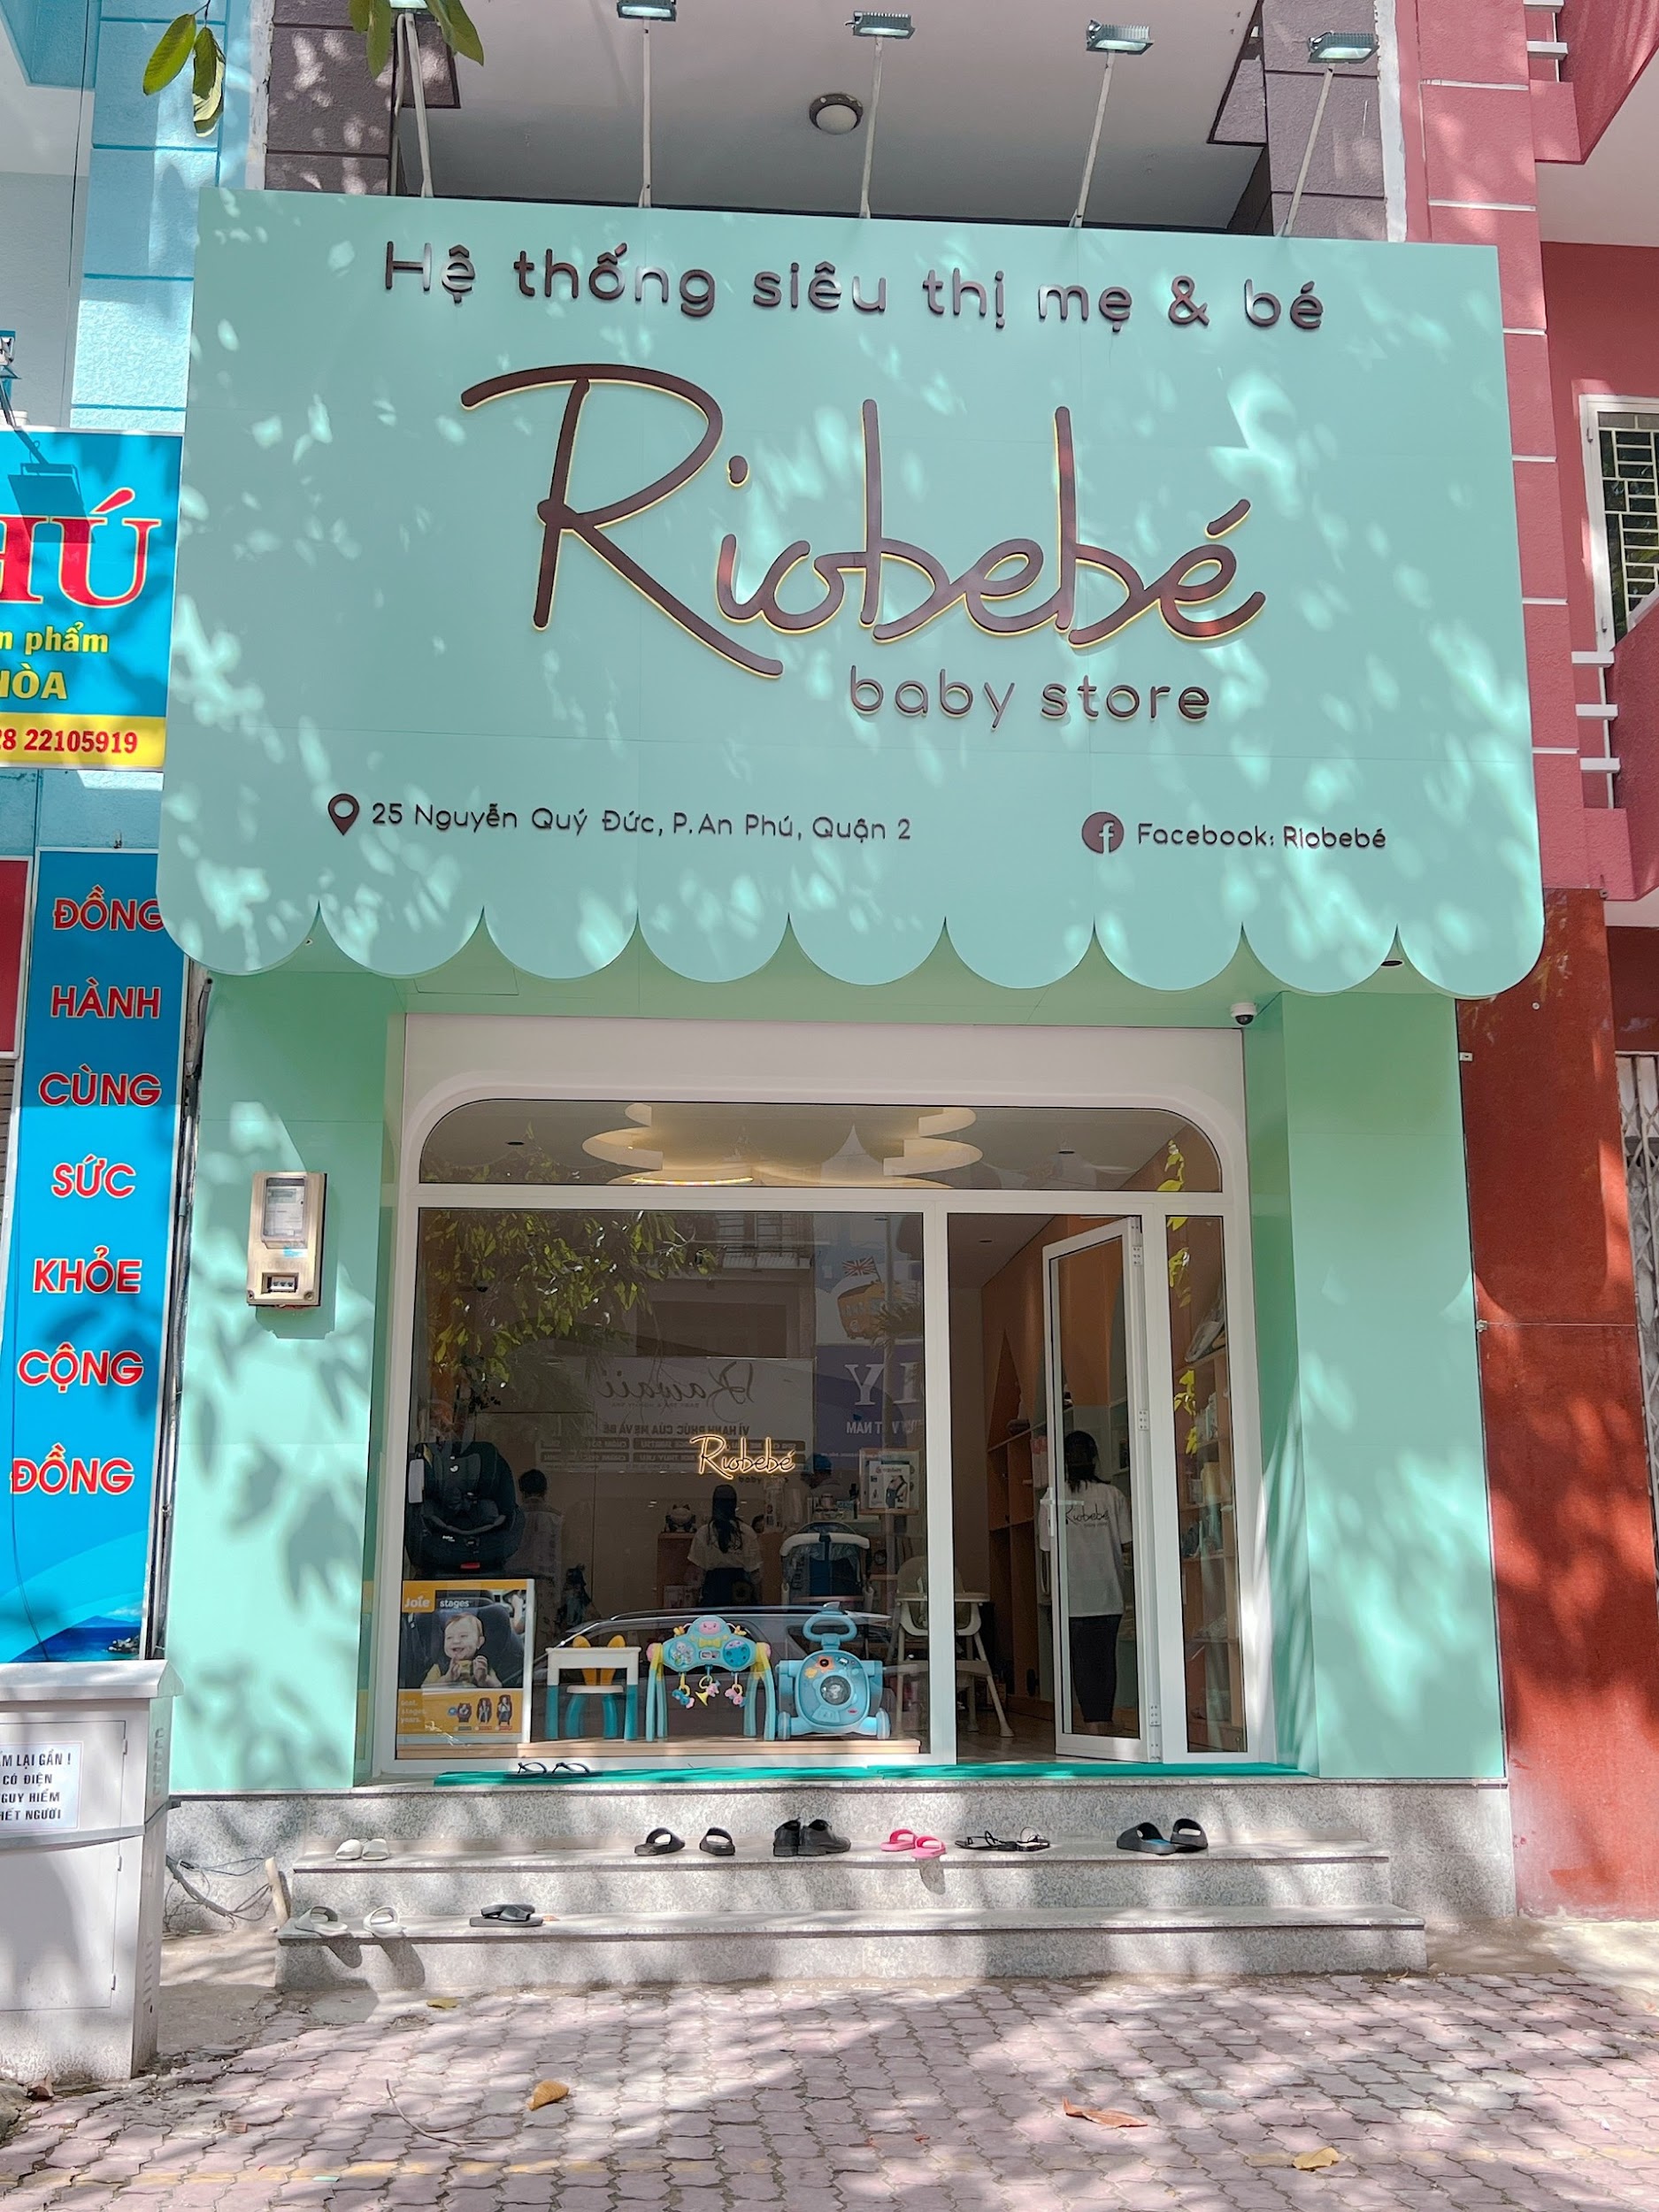 Riobebé Baby Store – A remarkable supermarket system for mothers and babies - Photo 1.